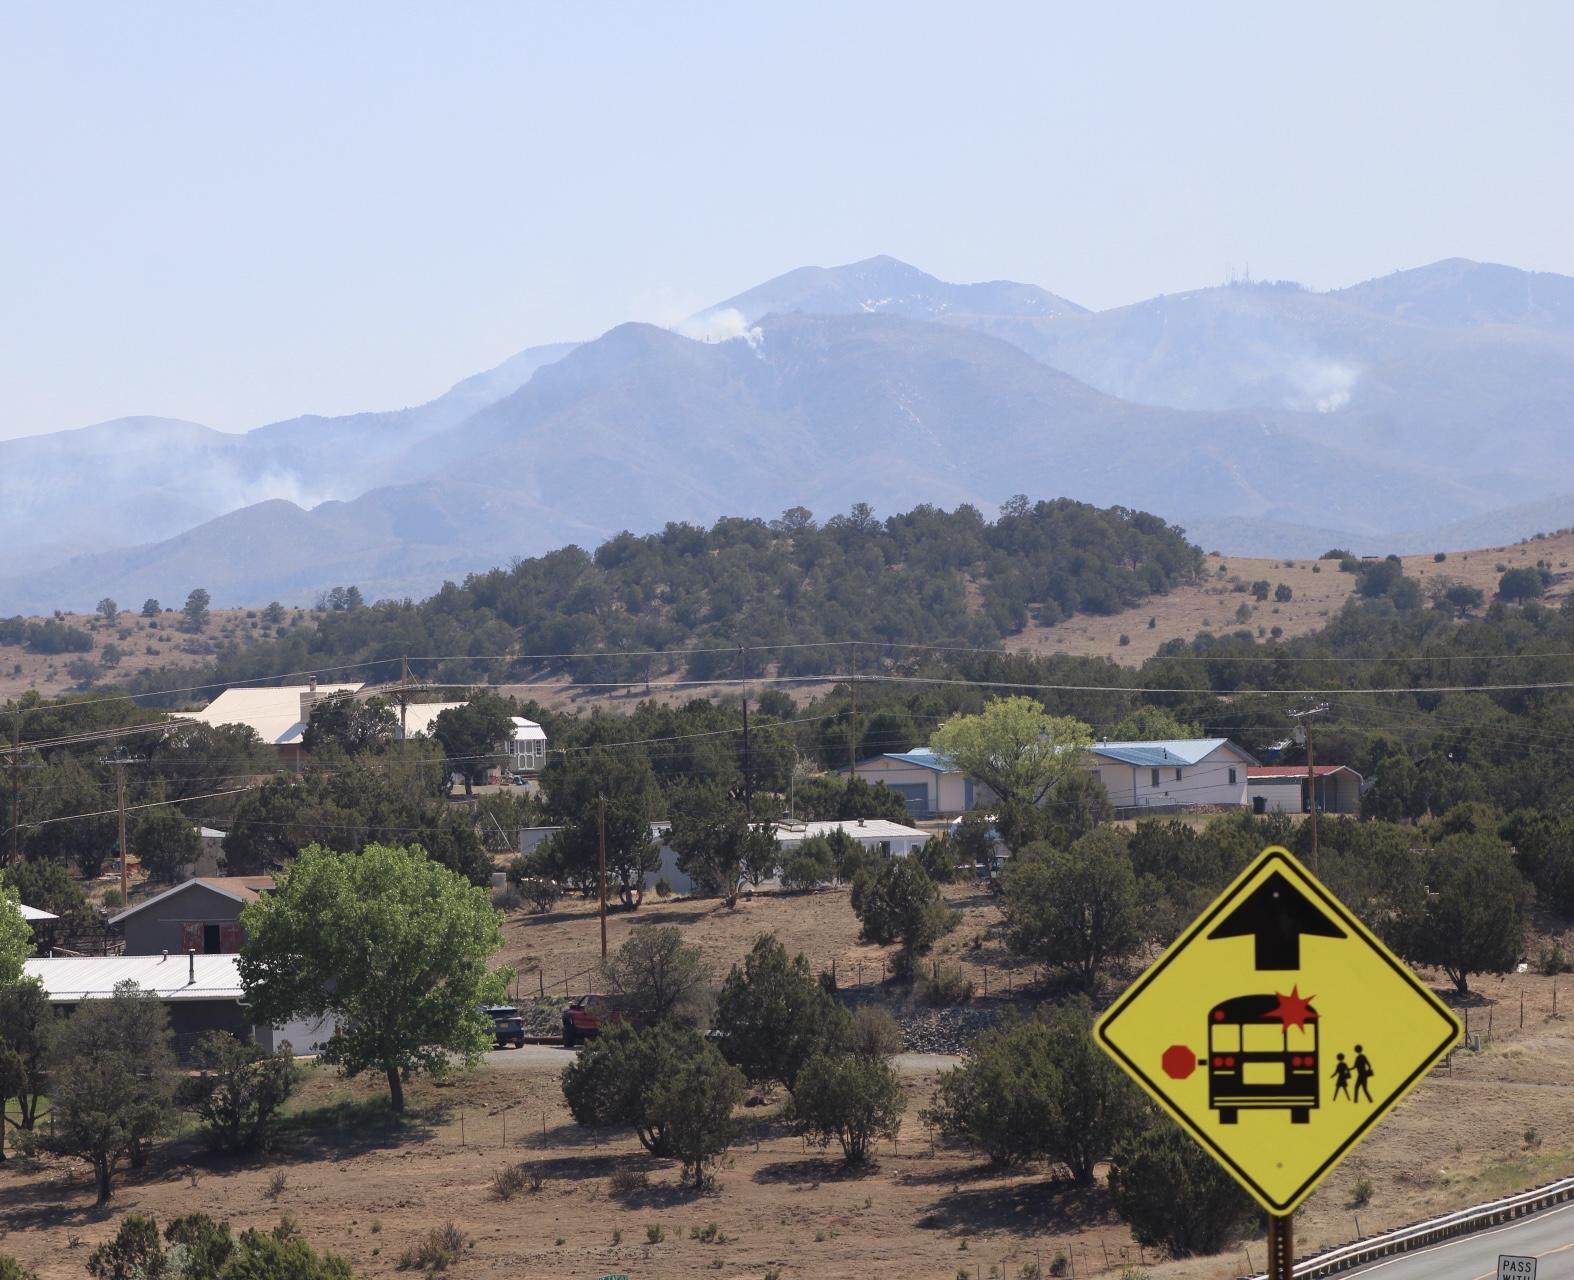 Houses and a school bus stop sign in the foreground are shadowed by smoke coming over a mountain range  